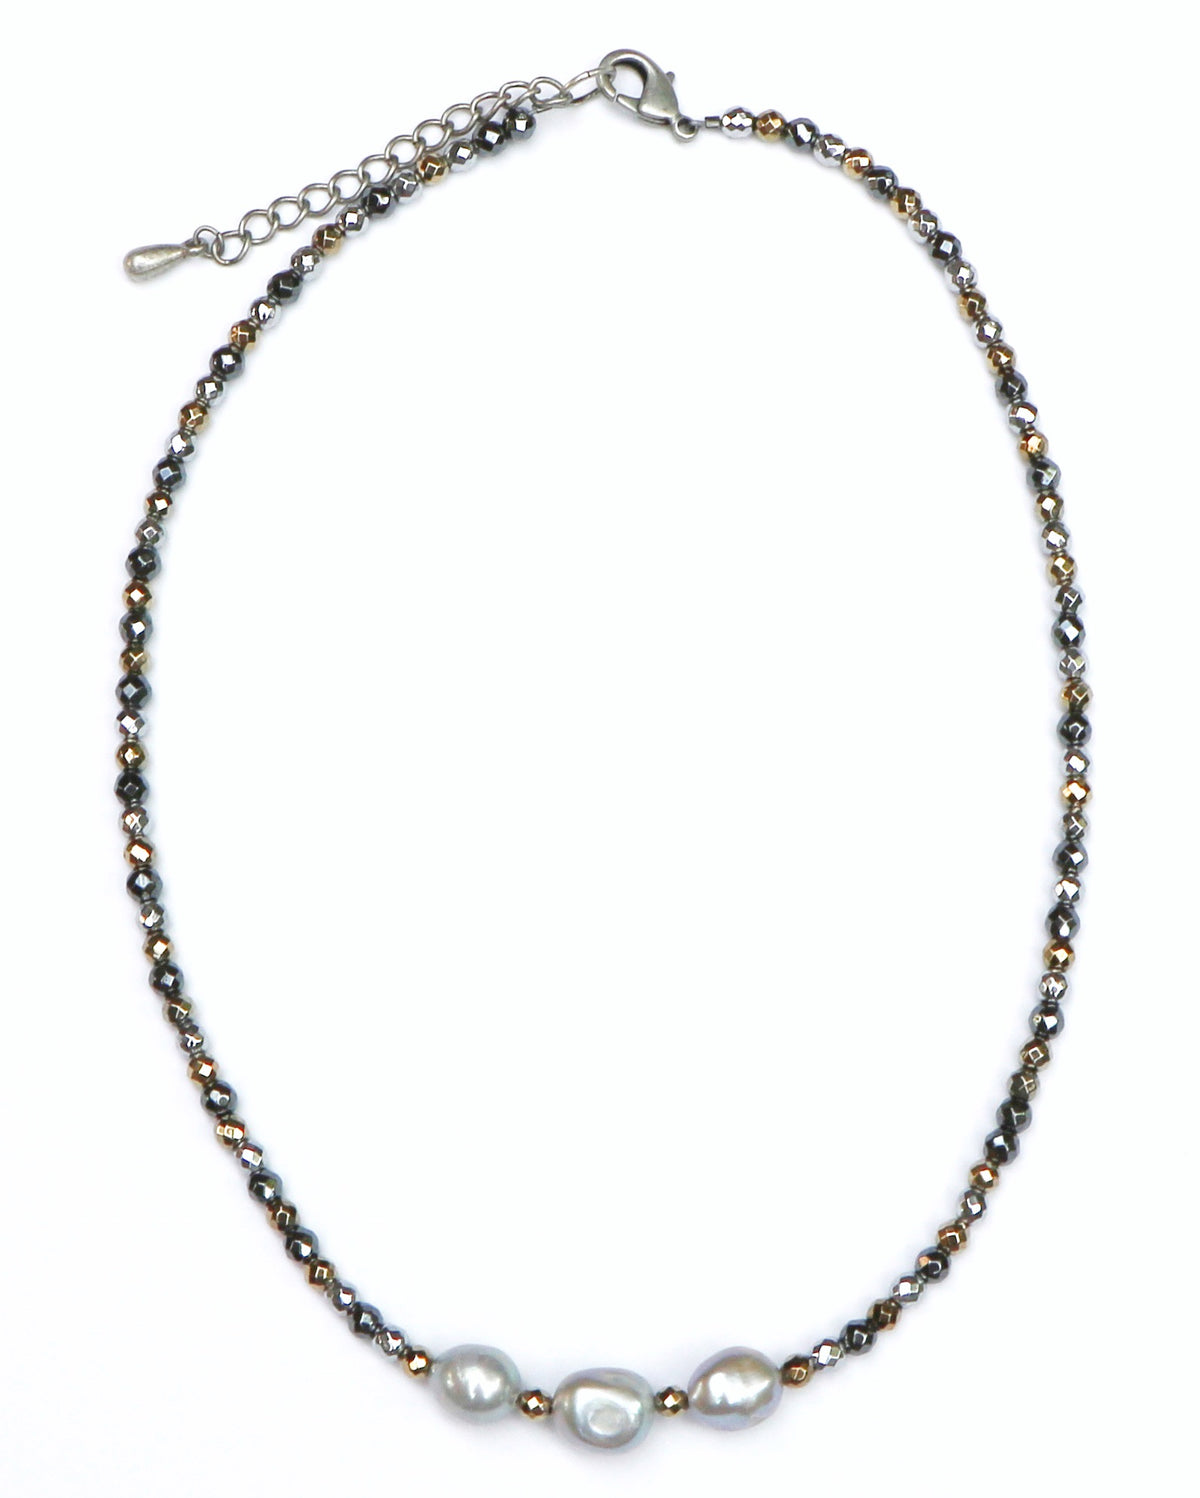 GREY PEARL NECKLACE WITH MULTI-COLORED ACCENT CHAIN